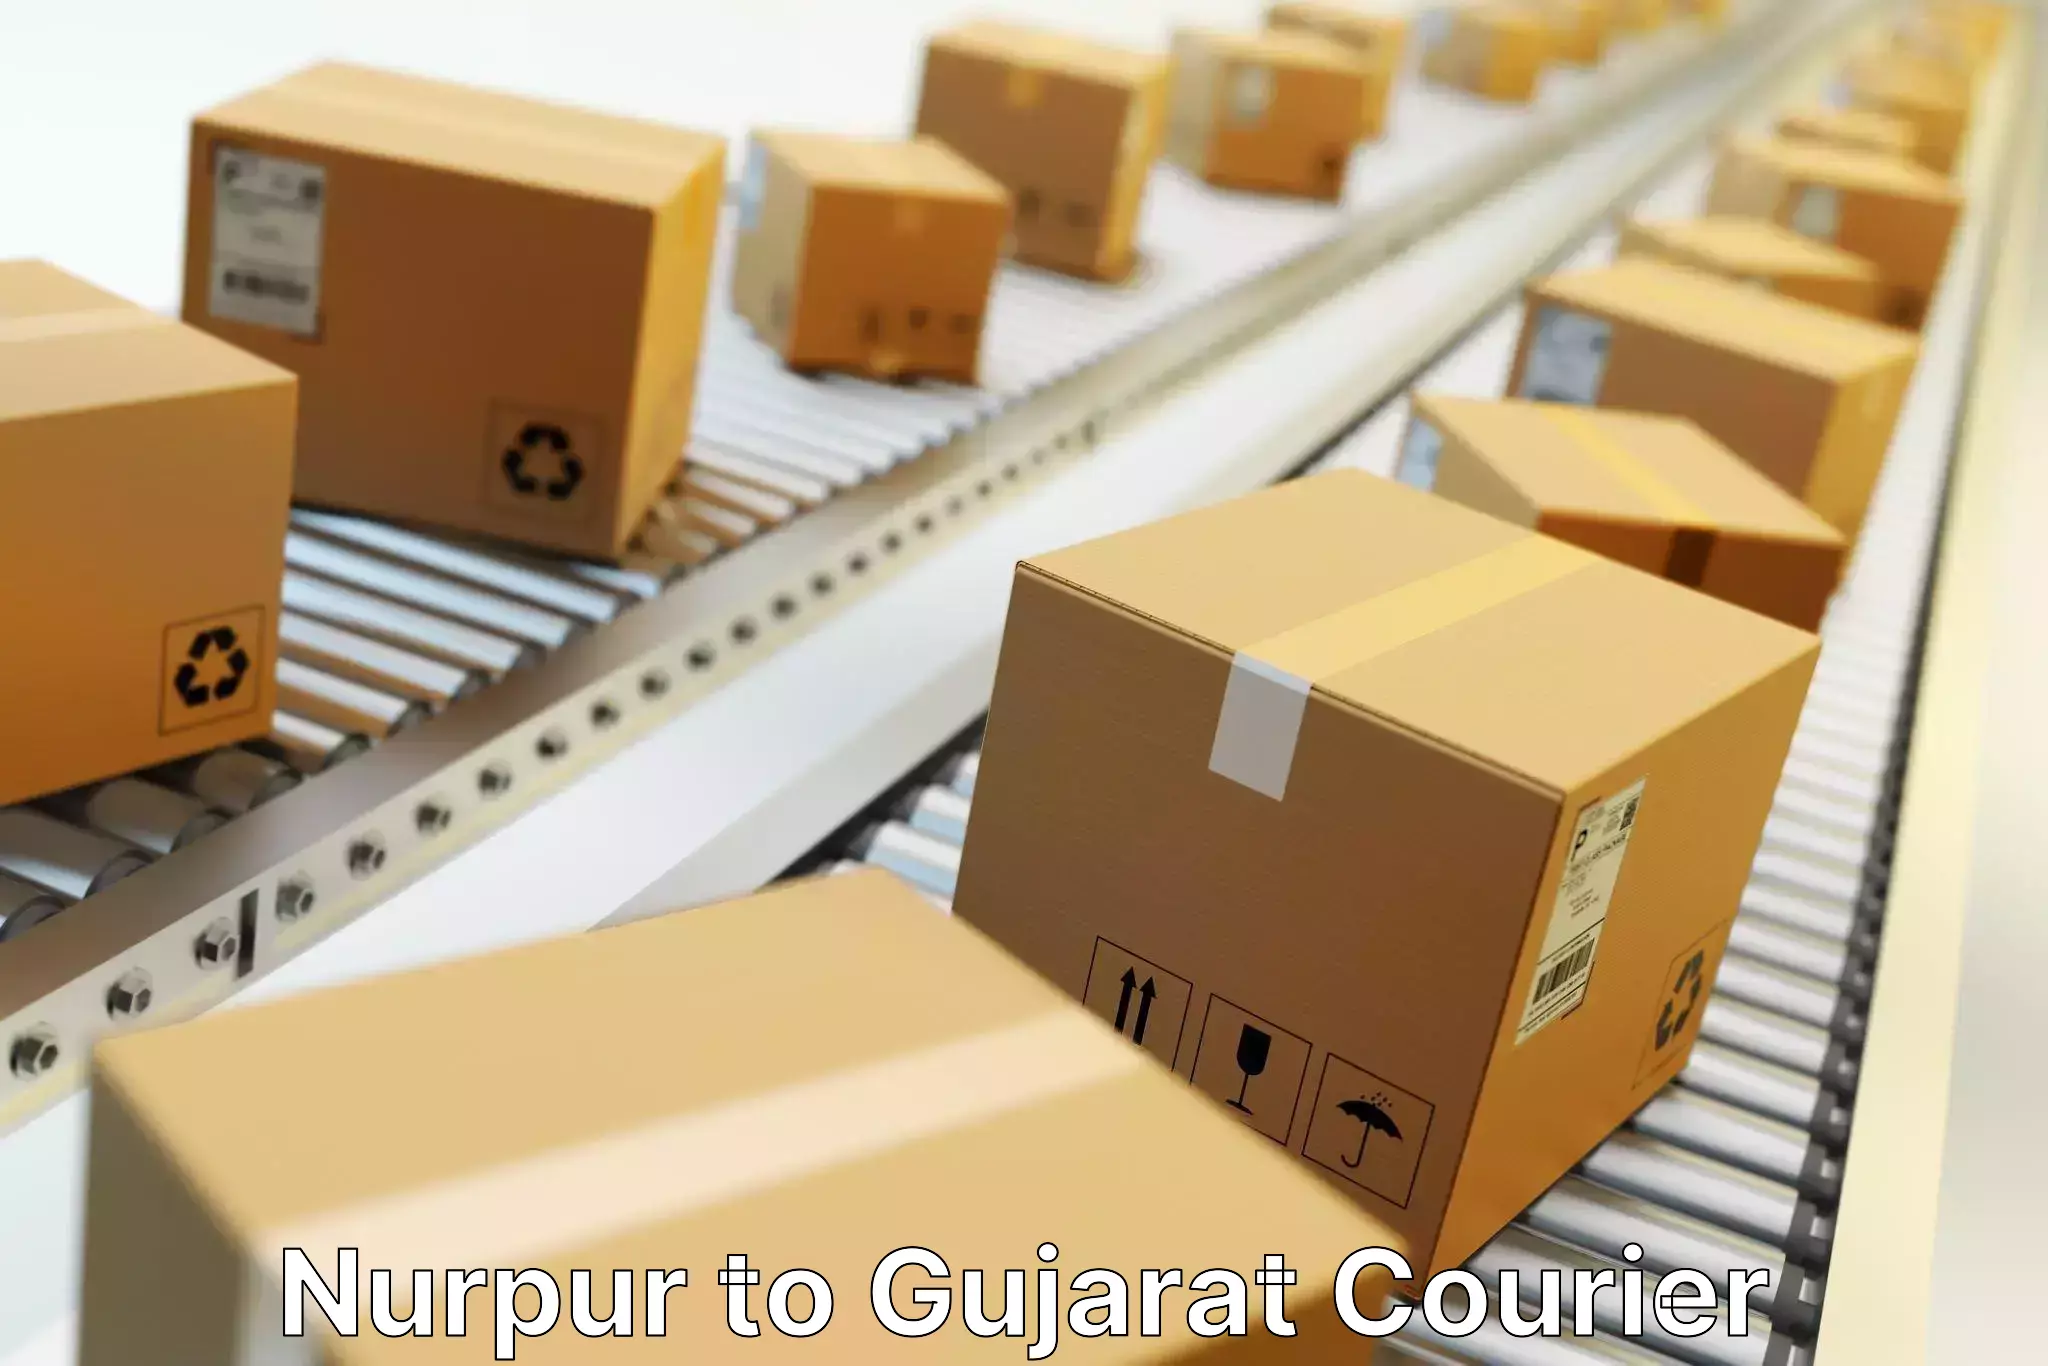 Fast-track shipping solutions Nurpur to Surat